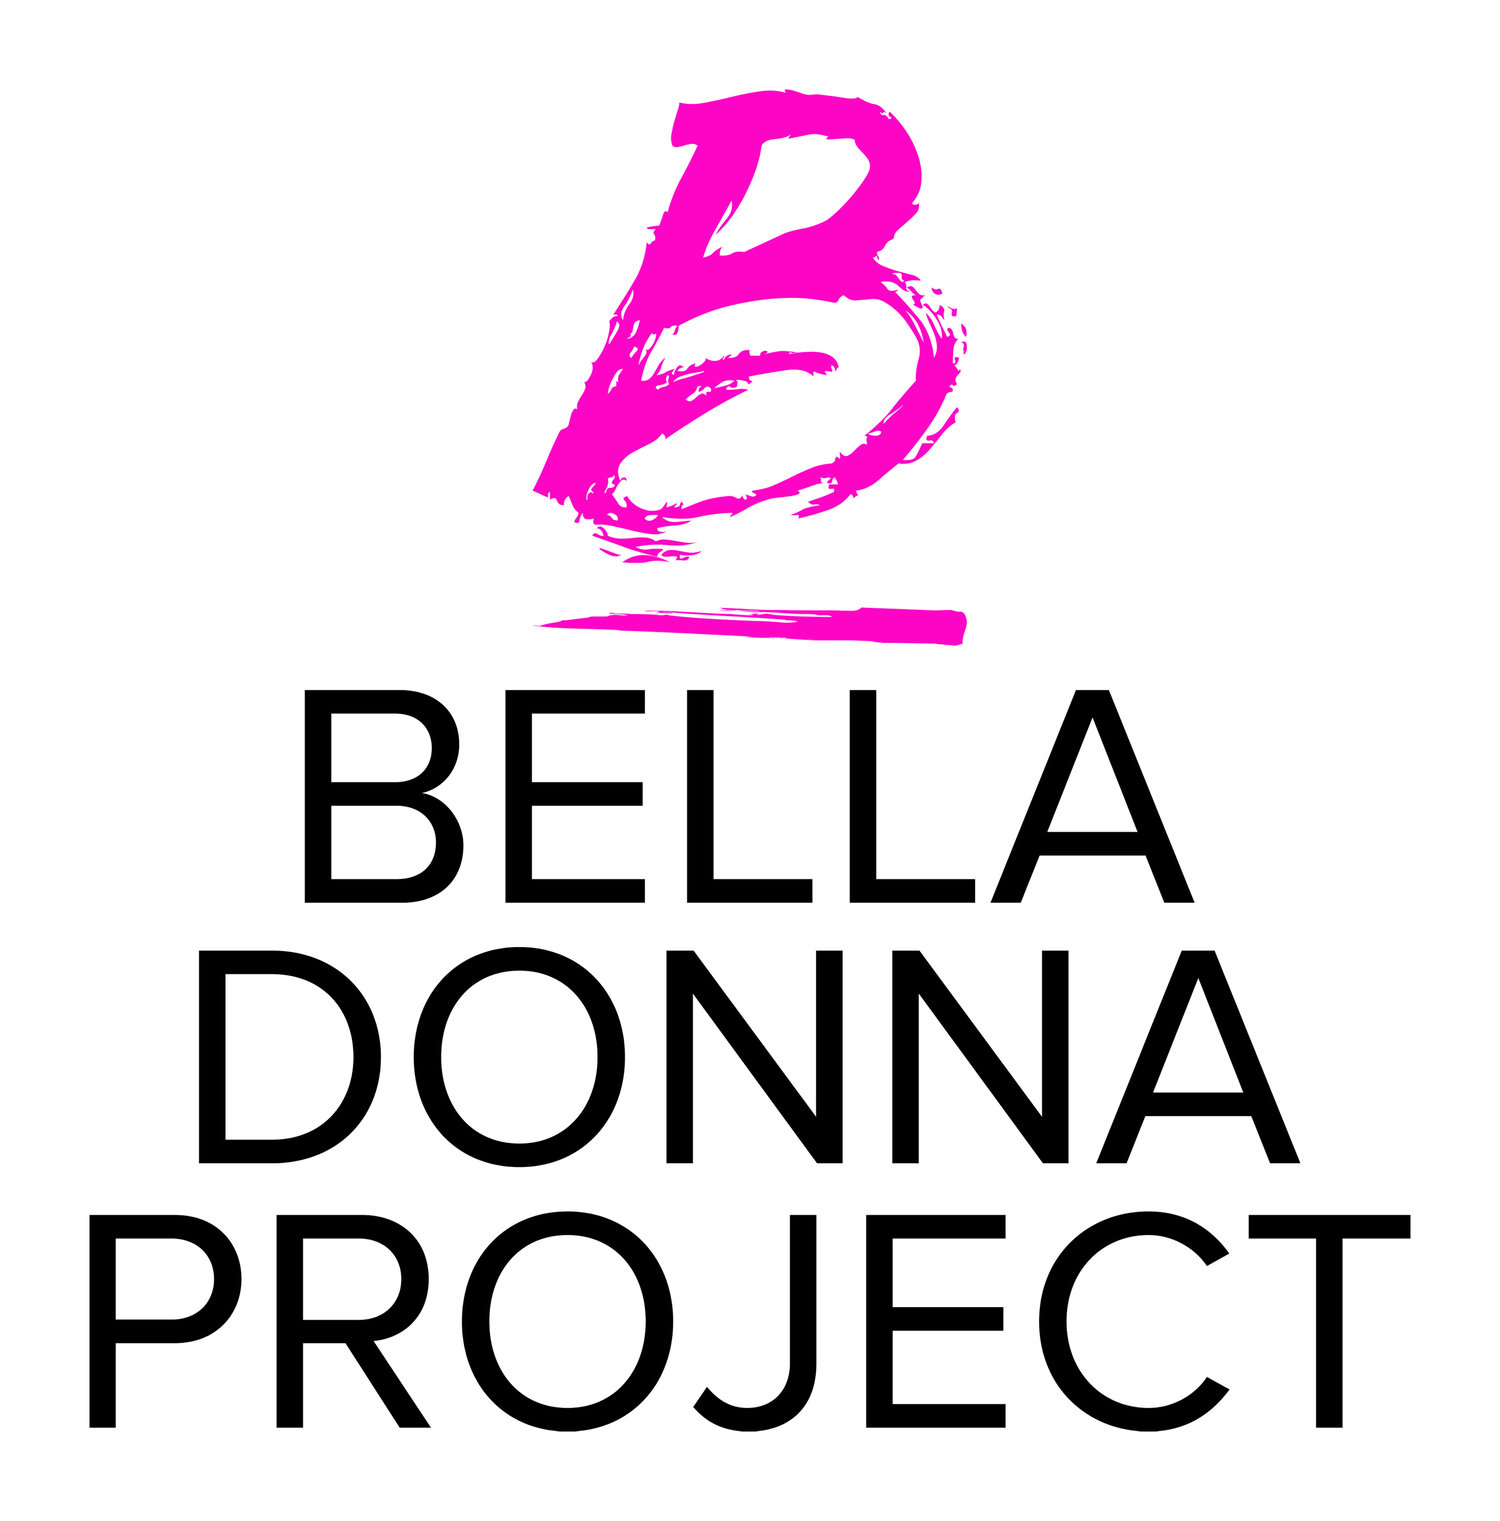 The Bella Donna Project